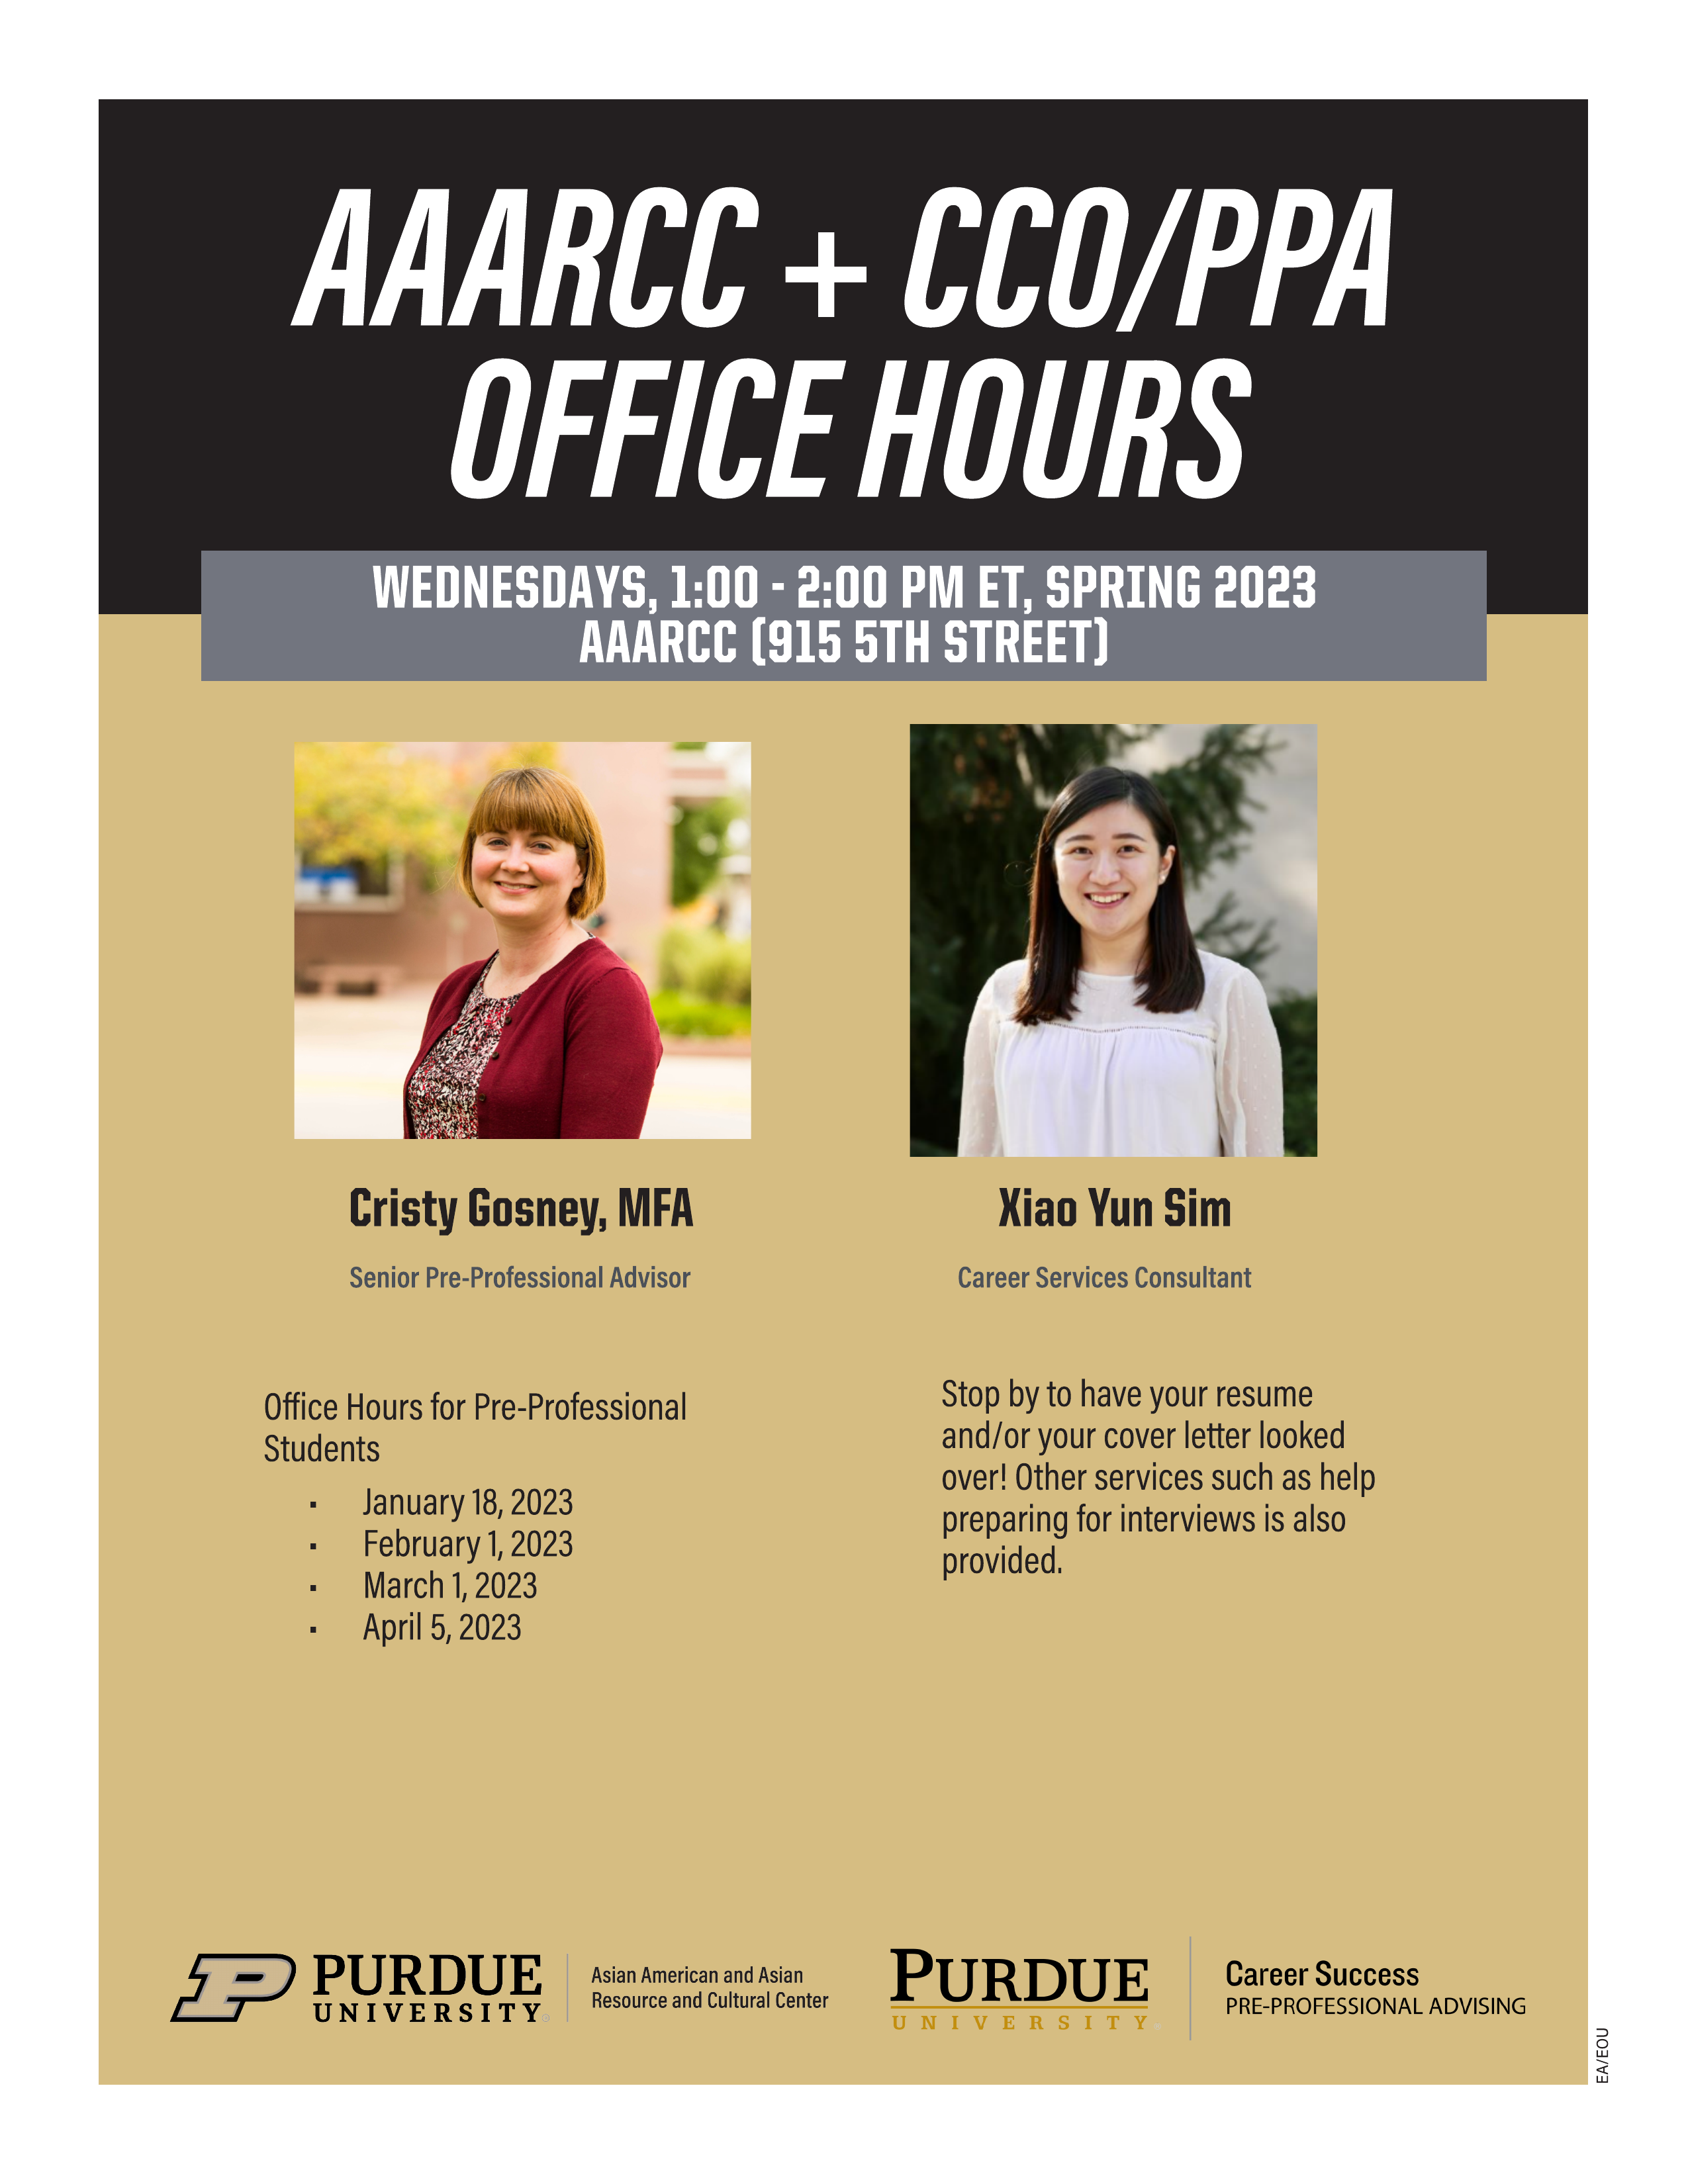 Purdue AAARCC Weekly Office Hours with the CCO and PPA.  Held weekly on Wednesdays from 1 to 2 PM at the AAARCC located at 915 5th Street, West Lafayette, IN 47906.